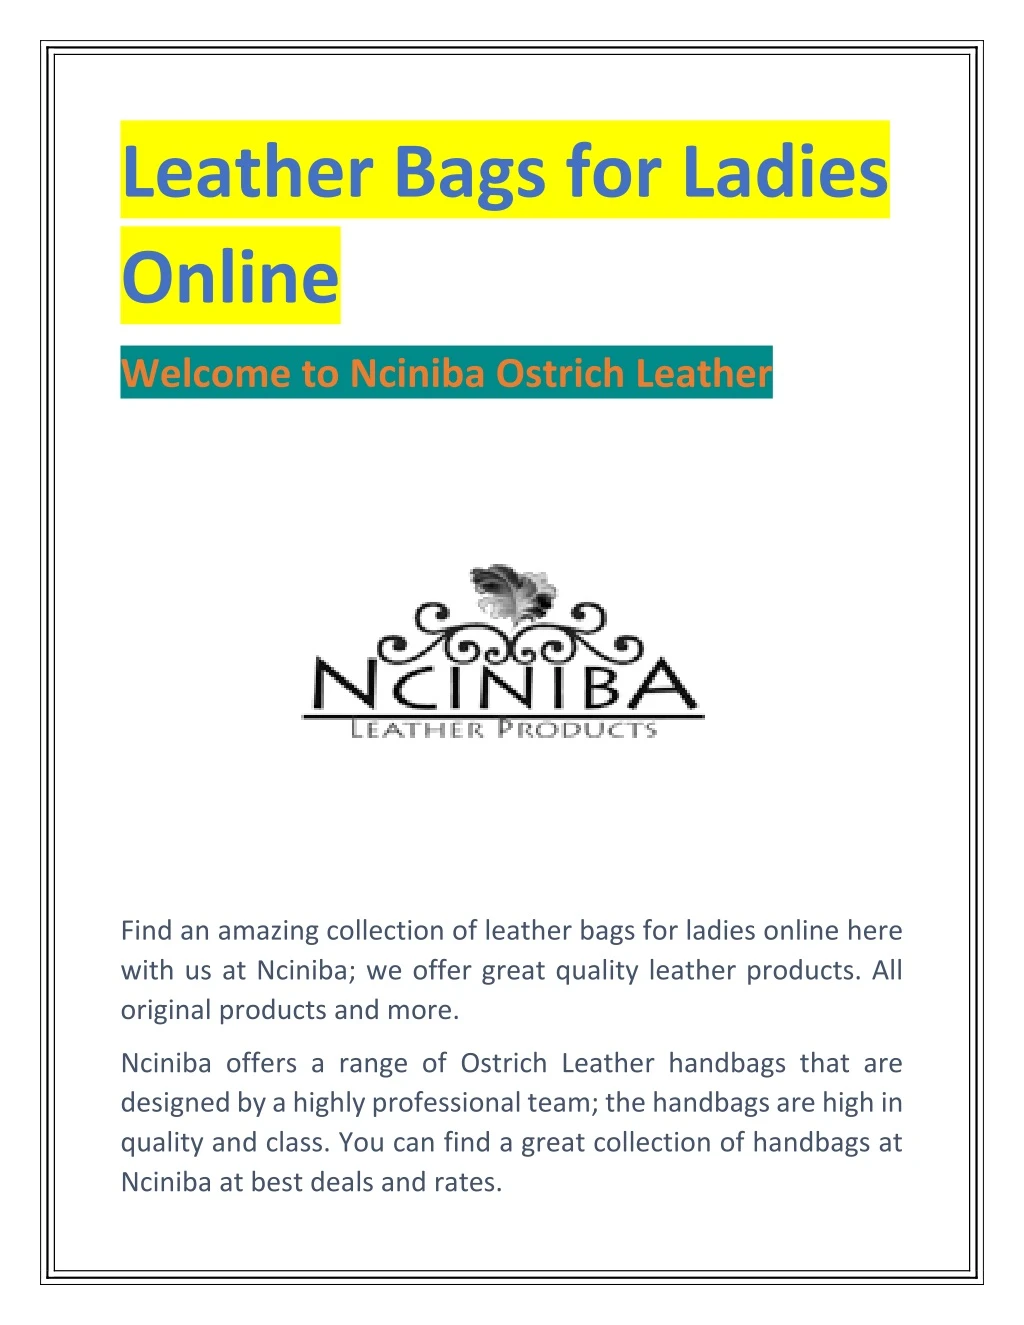 leather bags for ladies online